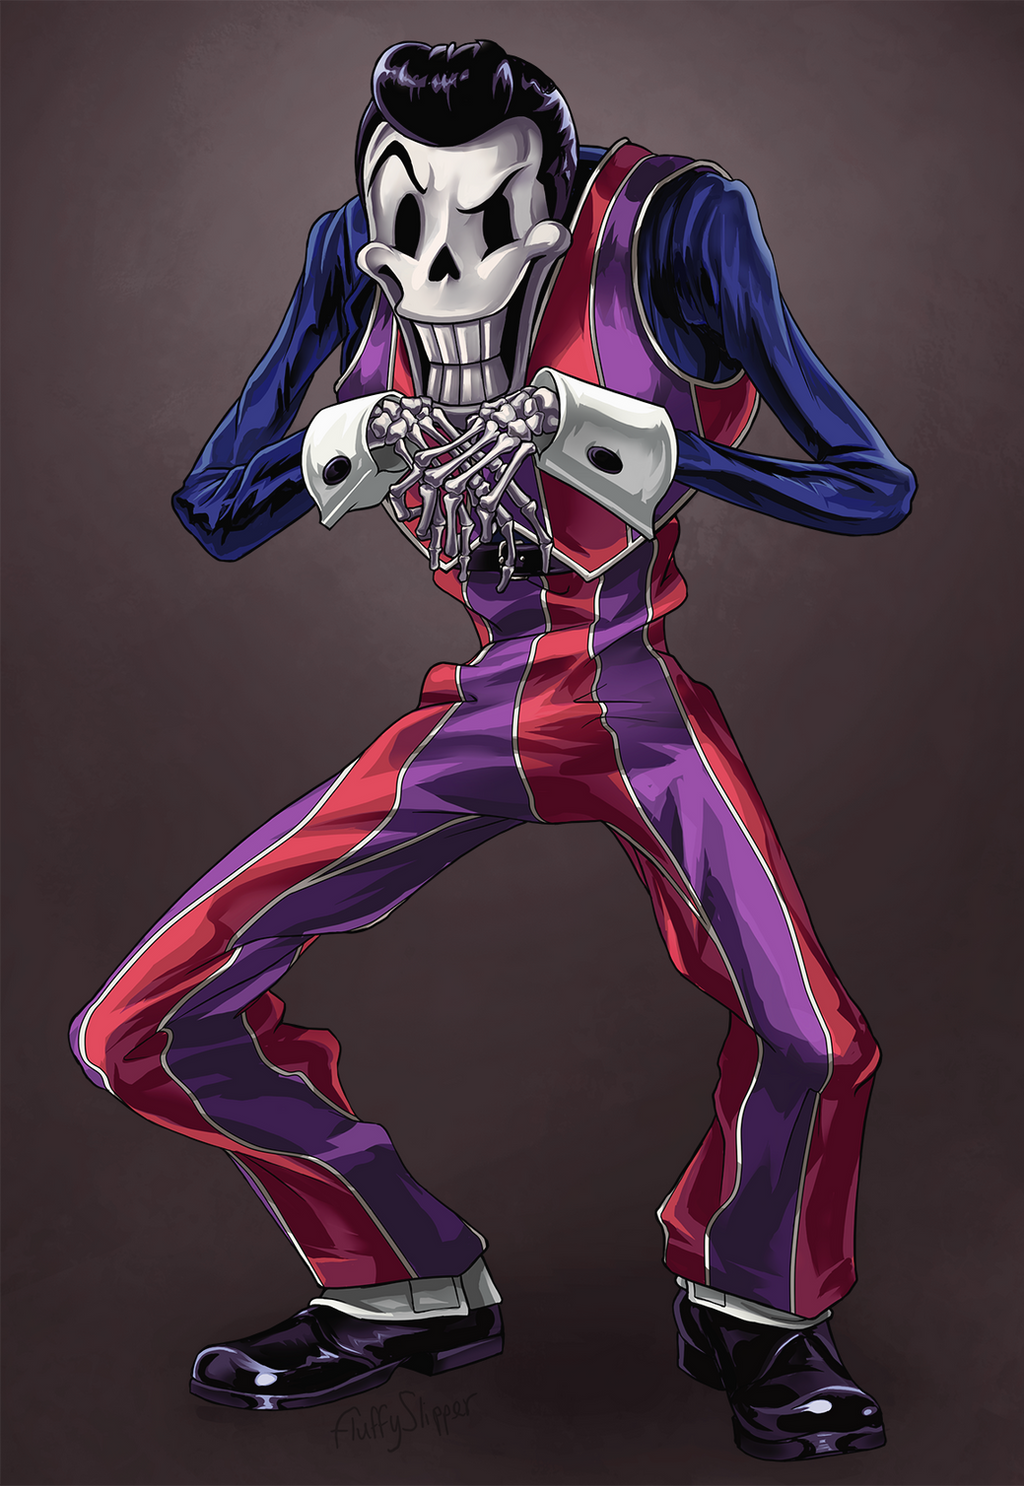 rotten_papyrus__lazy_town___undertale__by_fluffyslipper-dapitdx.png